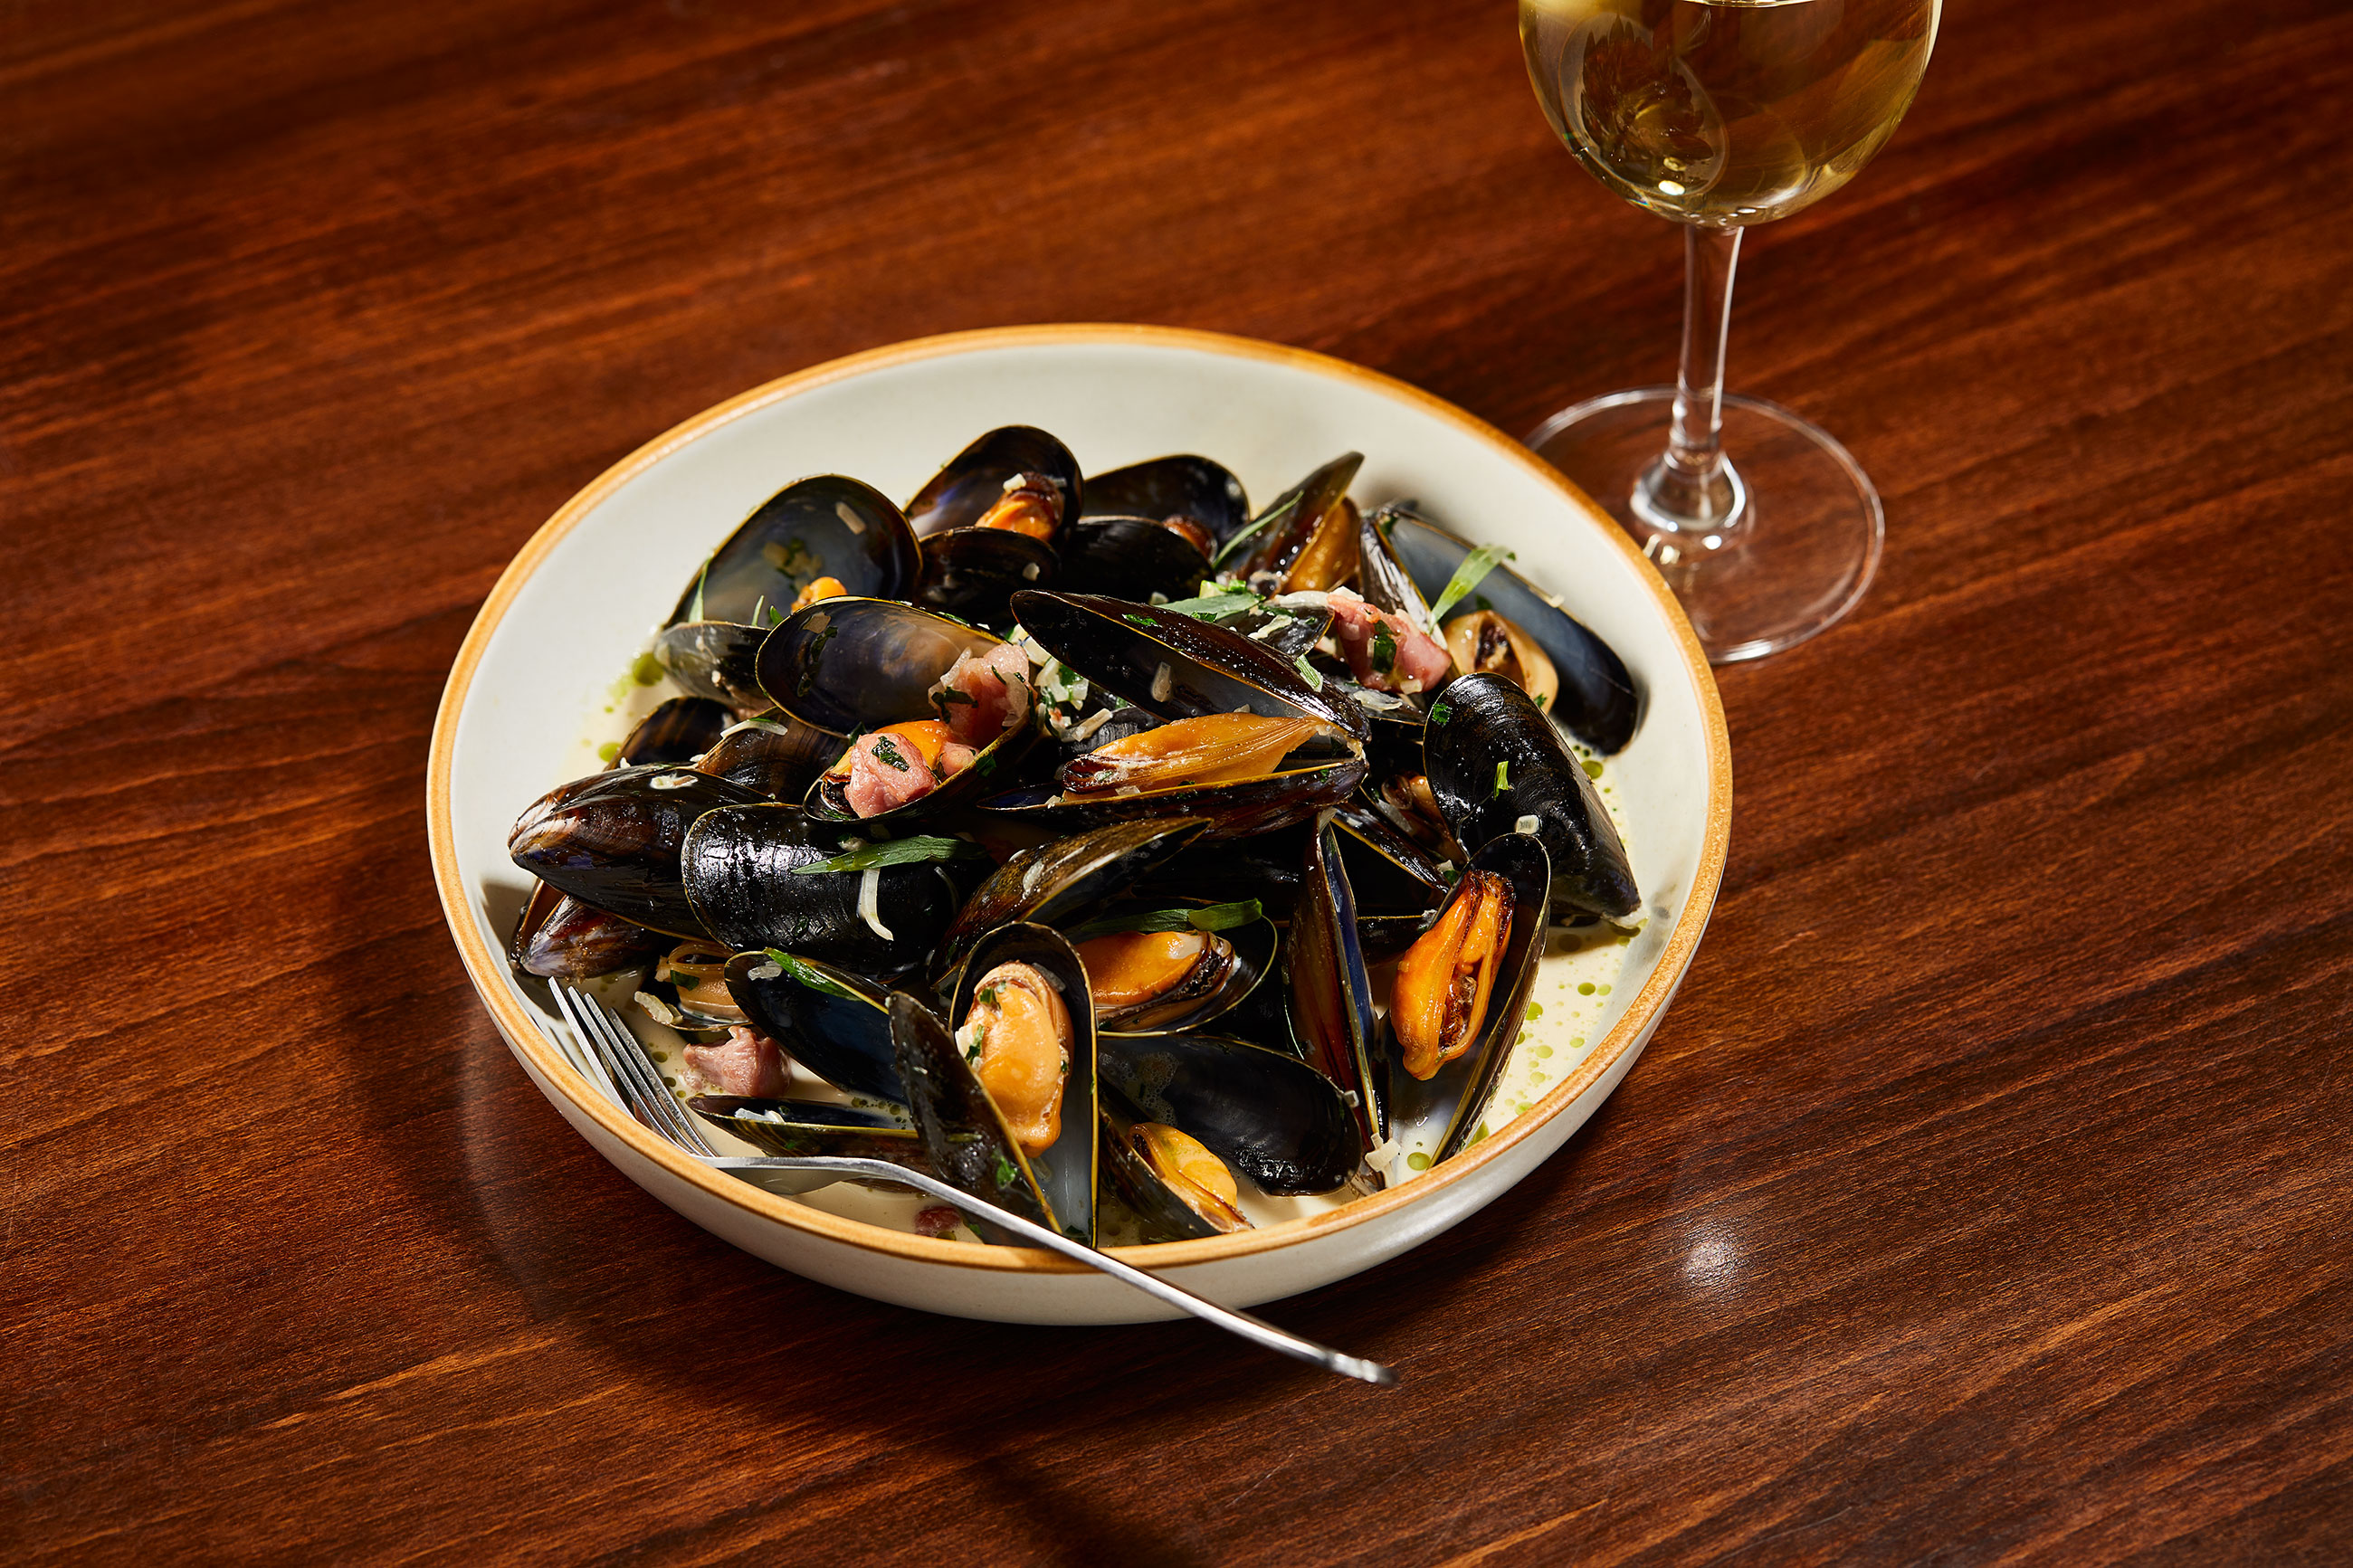 Linden Tree Pub, Mussels Bacon & Tarragon, Food and drink photographer Alastair Ferrier.